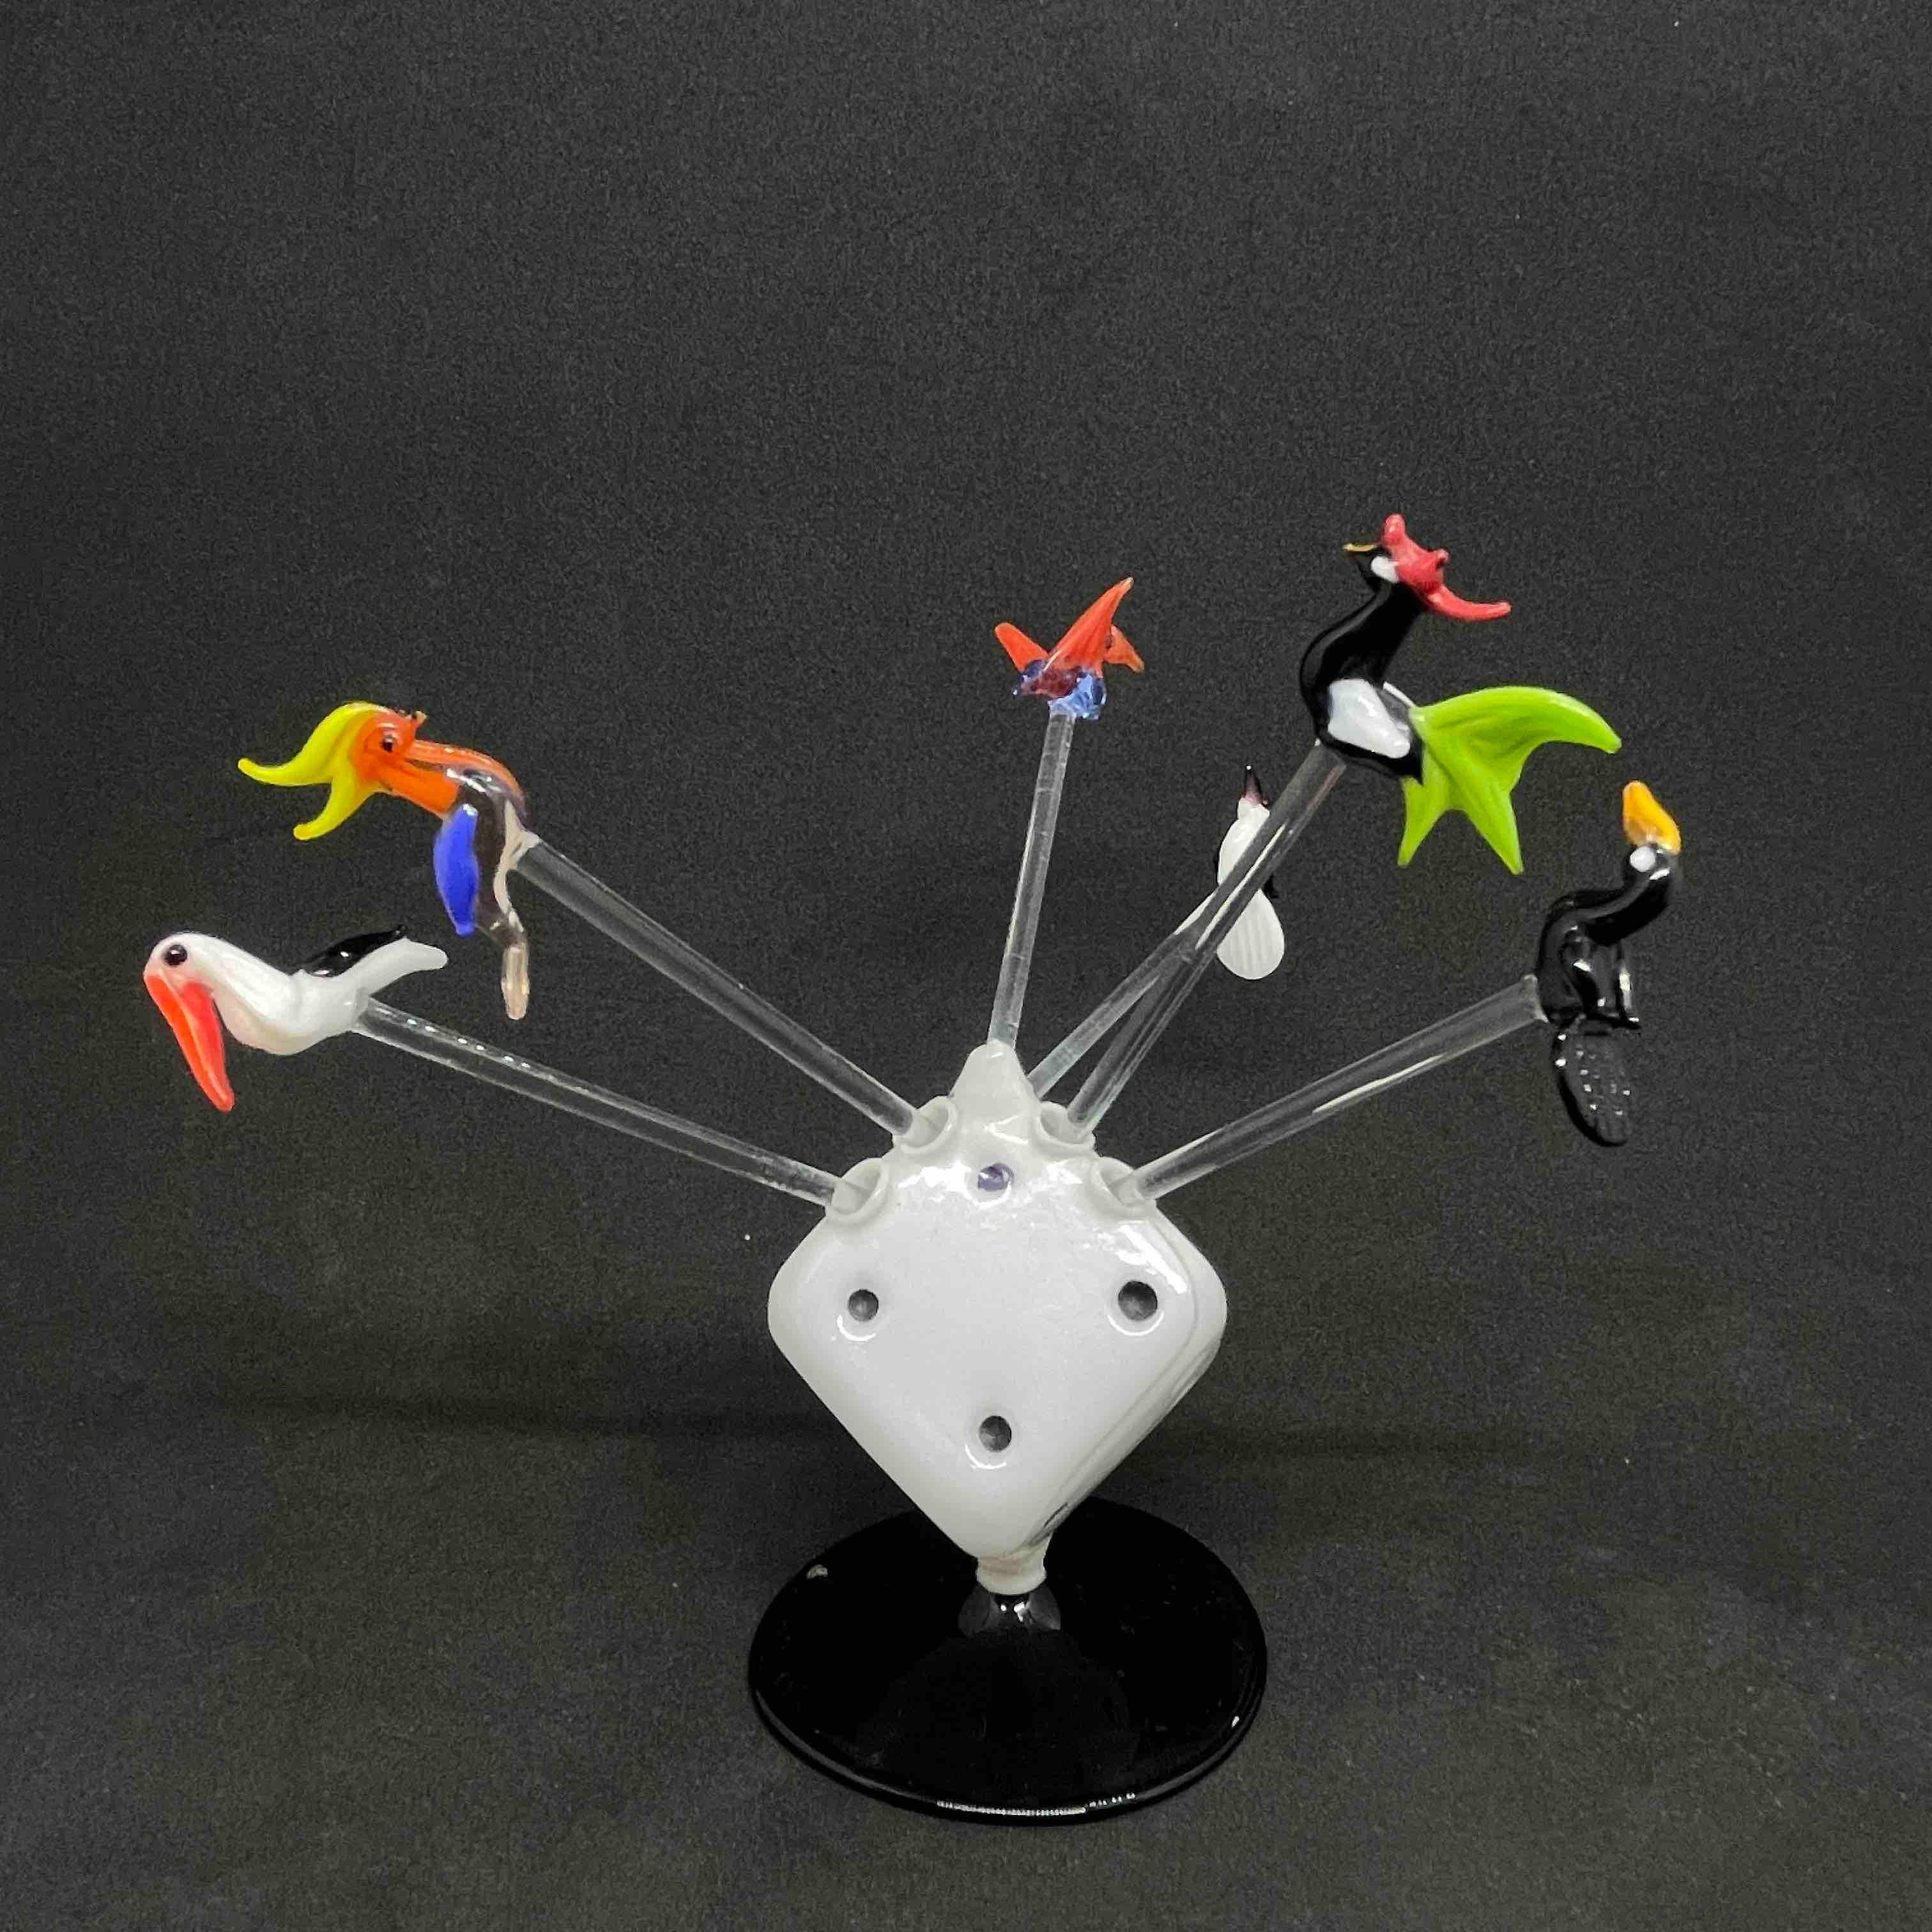 Hand-Crafted Bimini Glass Cocktail Picks with Dice Stand, 1960s, Vienna Austria For Sale